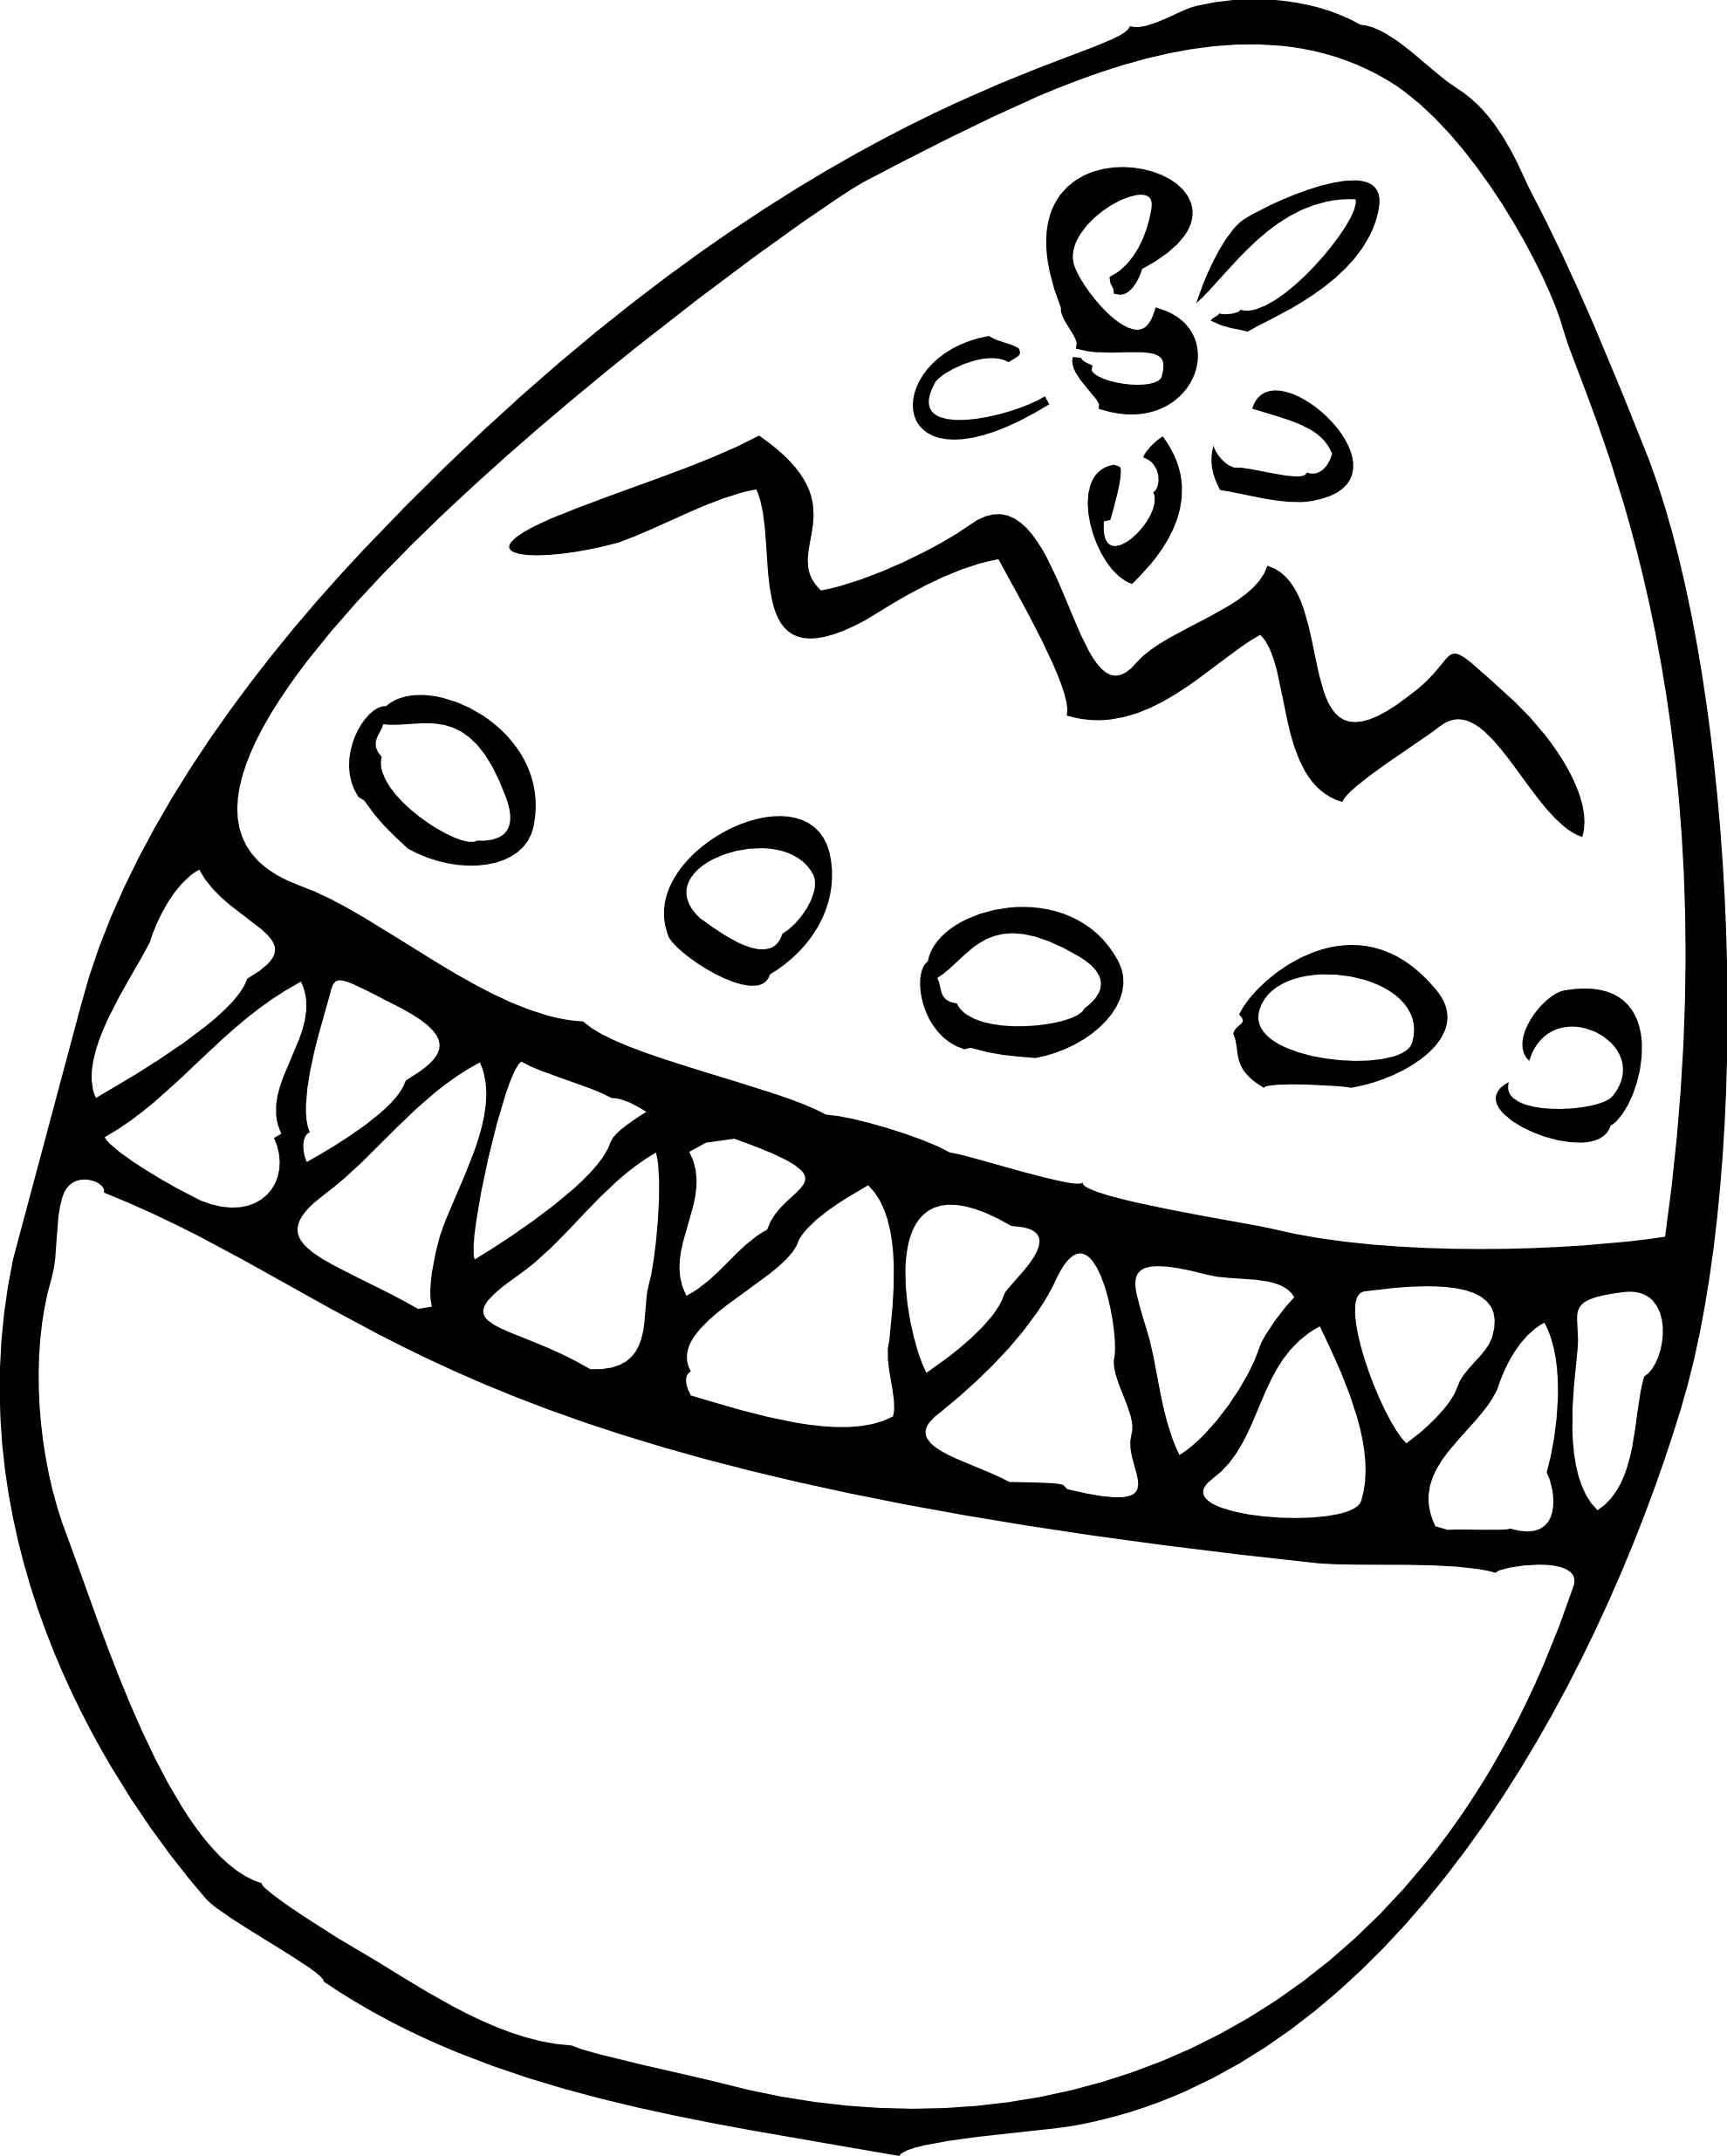 Financial clipart black and white. Cute alligator drawing at